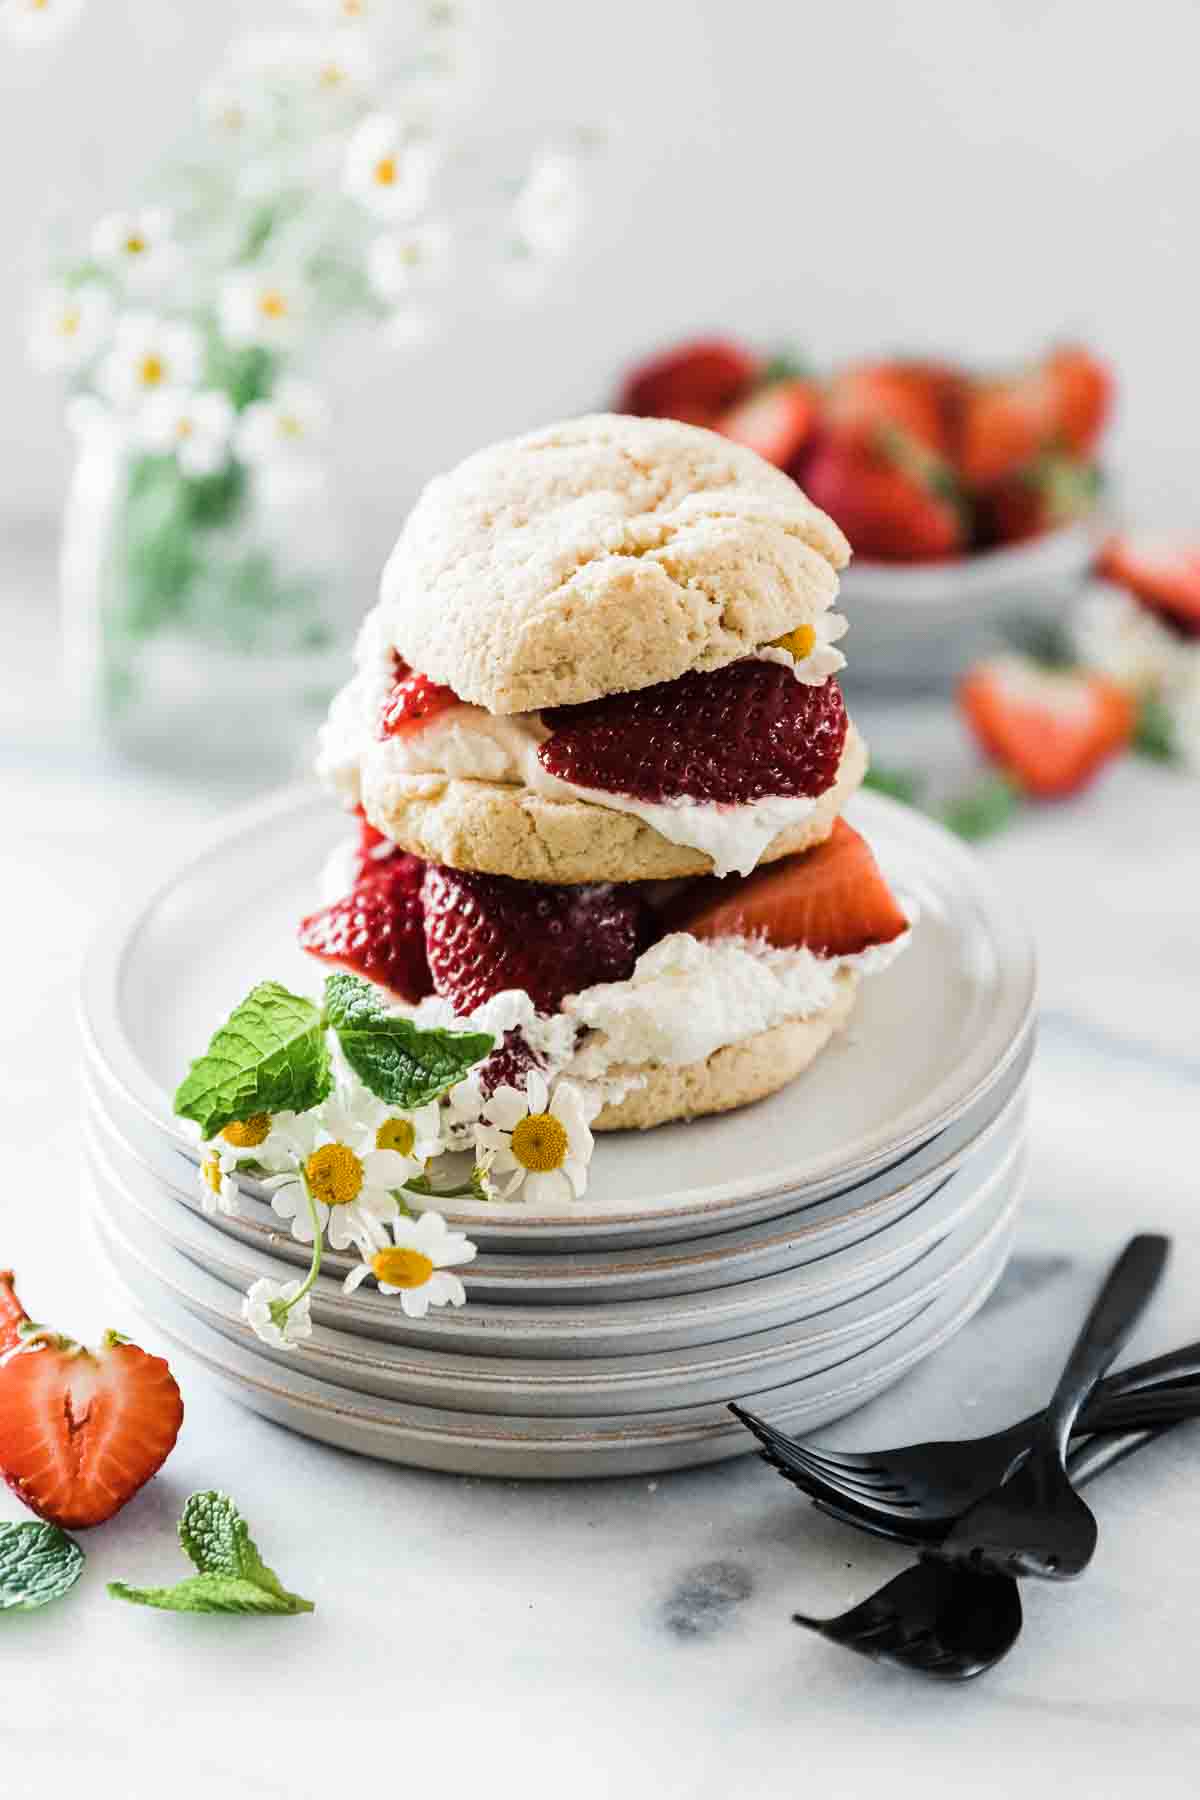 A single serve strawberry shortcake on a stack of grey dessert plates with flowers on the side.